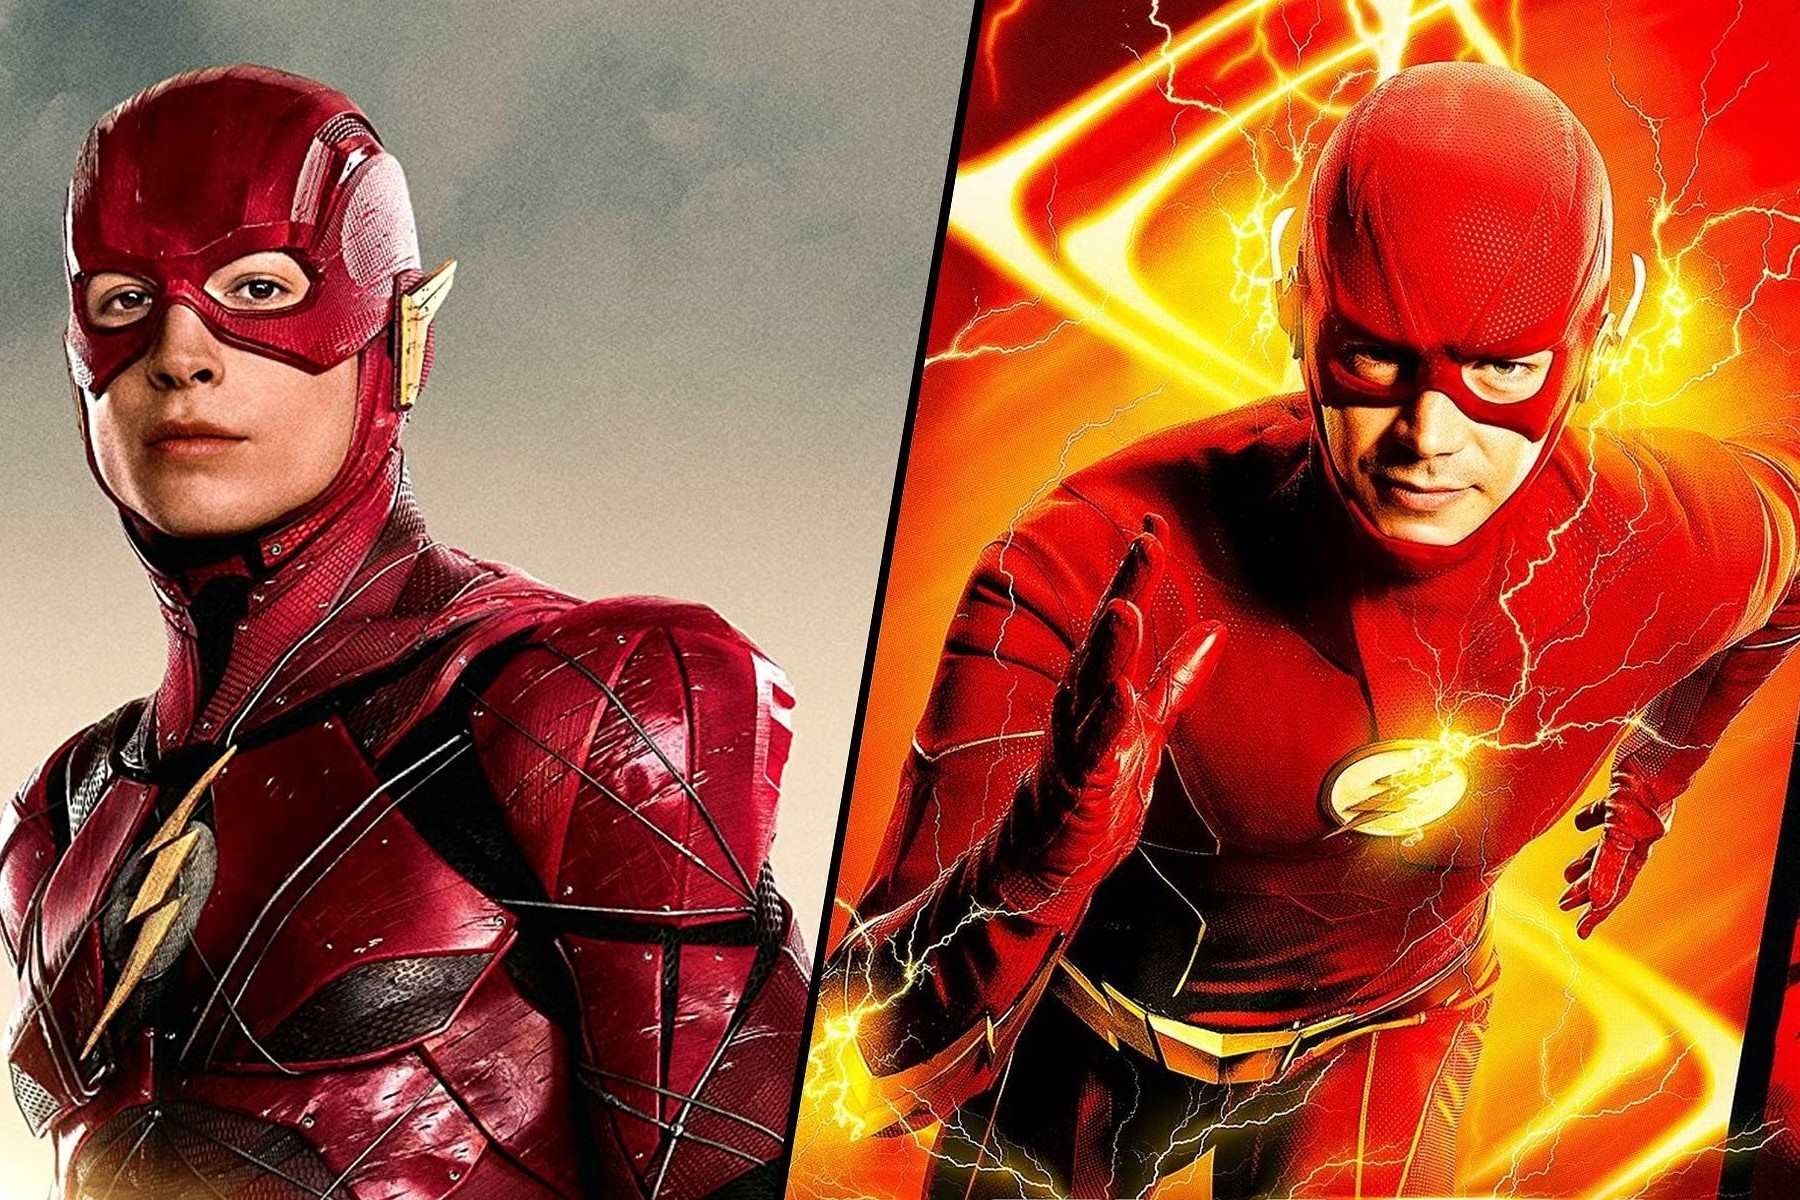 The Flash Movie: Grant Gustin Vs. Ezra Miller - Who Would Have Ruled The Box Office?